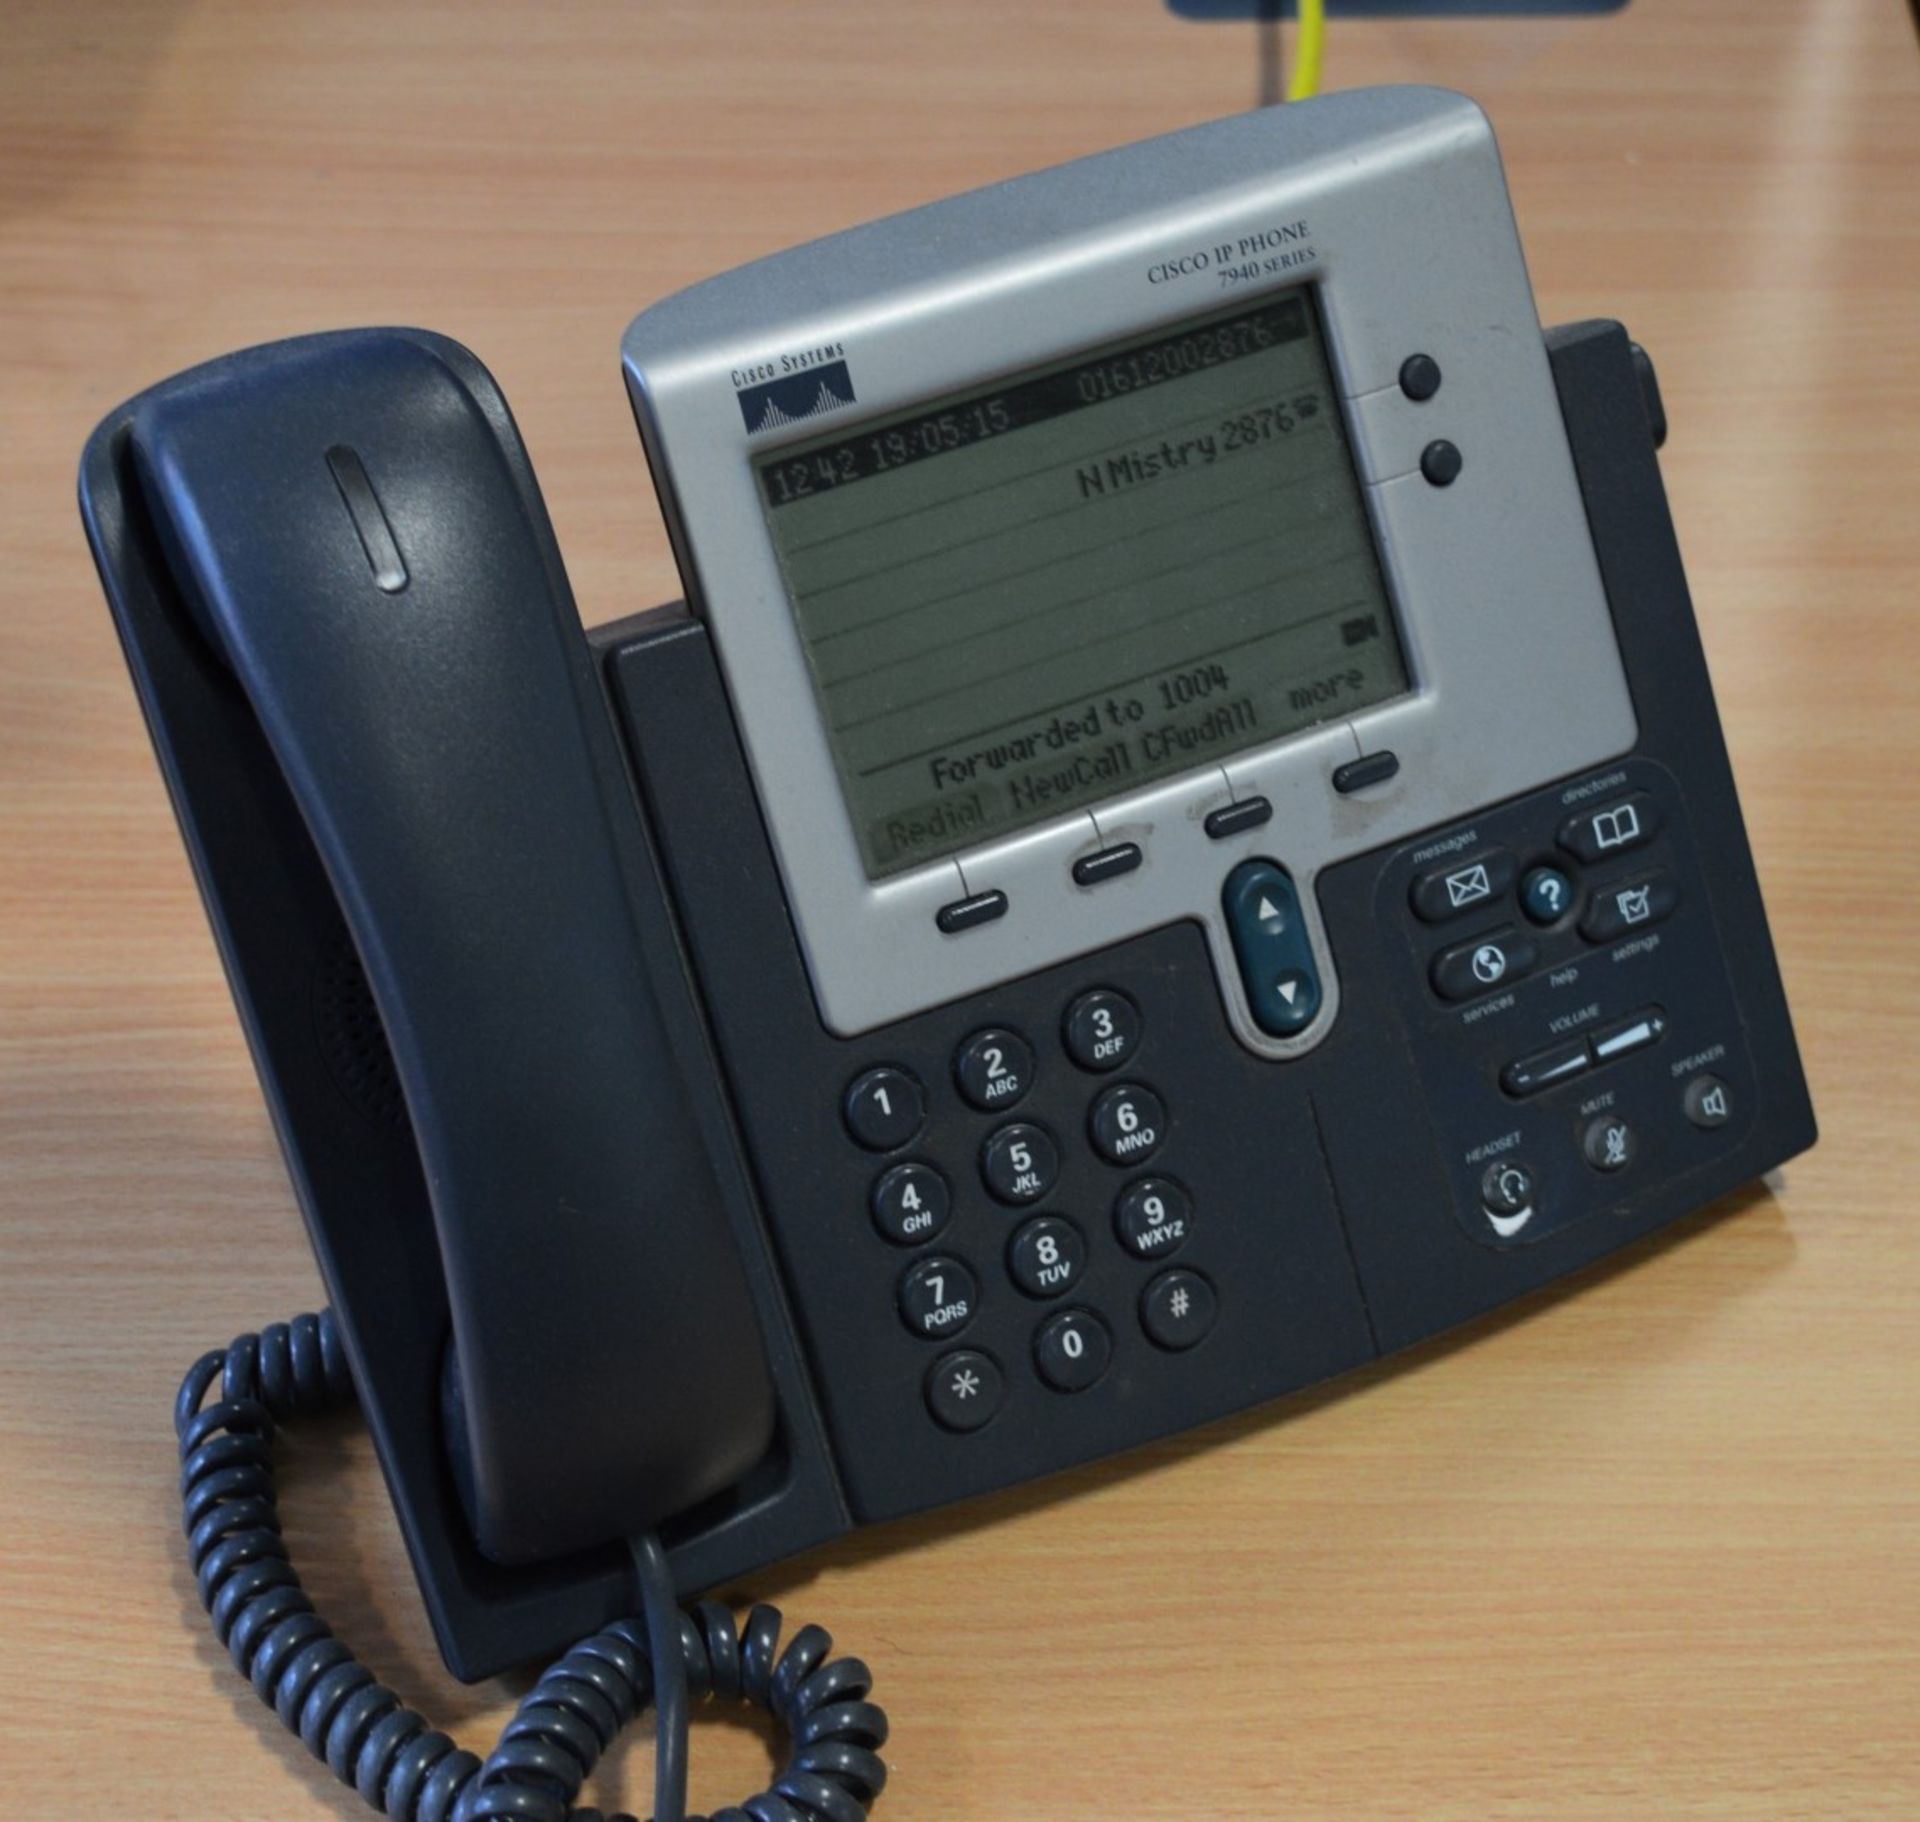 1 x Cisco 7940 Unified VoIP Business IP Phone Handset - From Working Office Environment - Ref